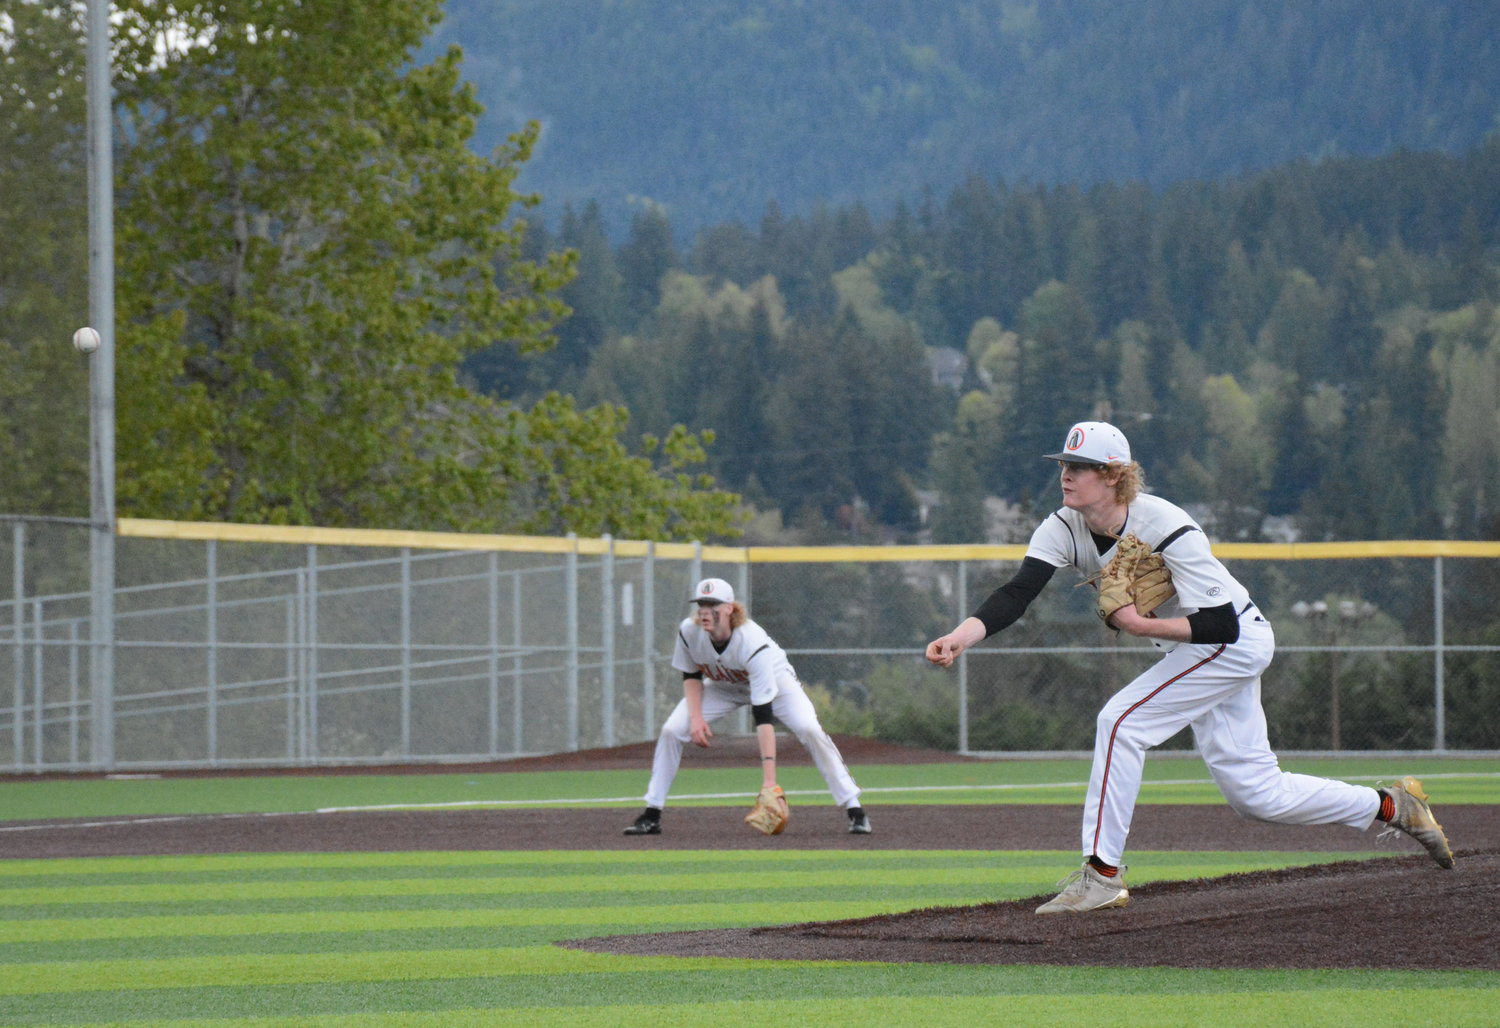 Anden Holley throws a pitch, r., as twin brother Aiden Holley stands ready at third base in Blaine’s 6-4 loss to Overlake-Bear Creek May 14 at Sehome High School.